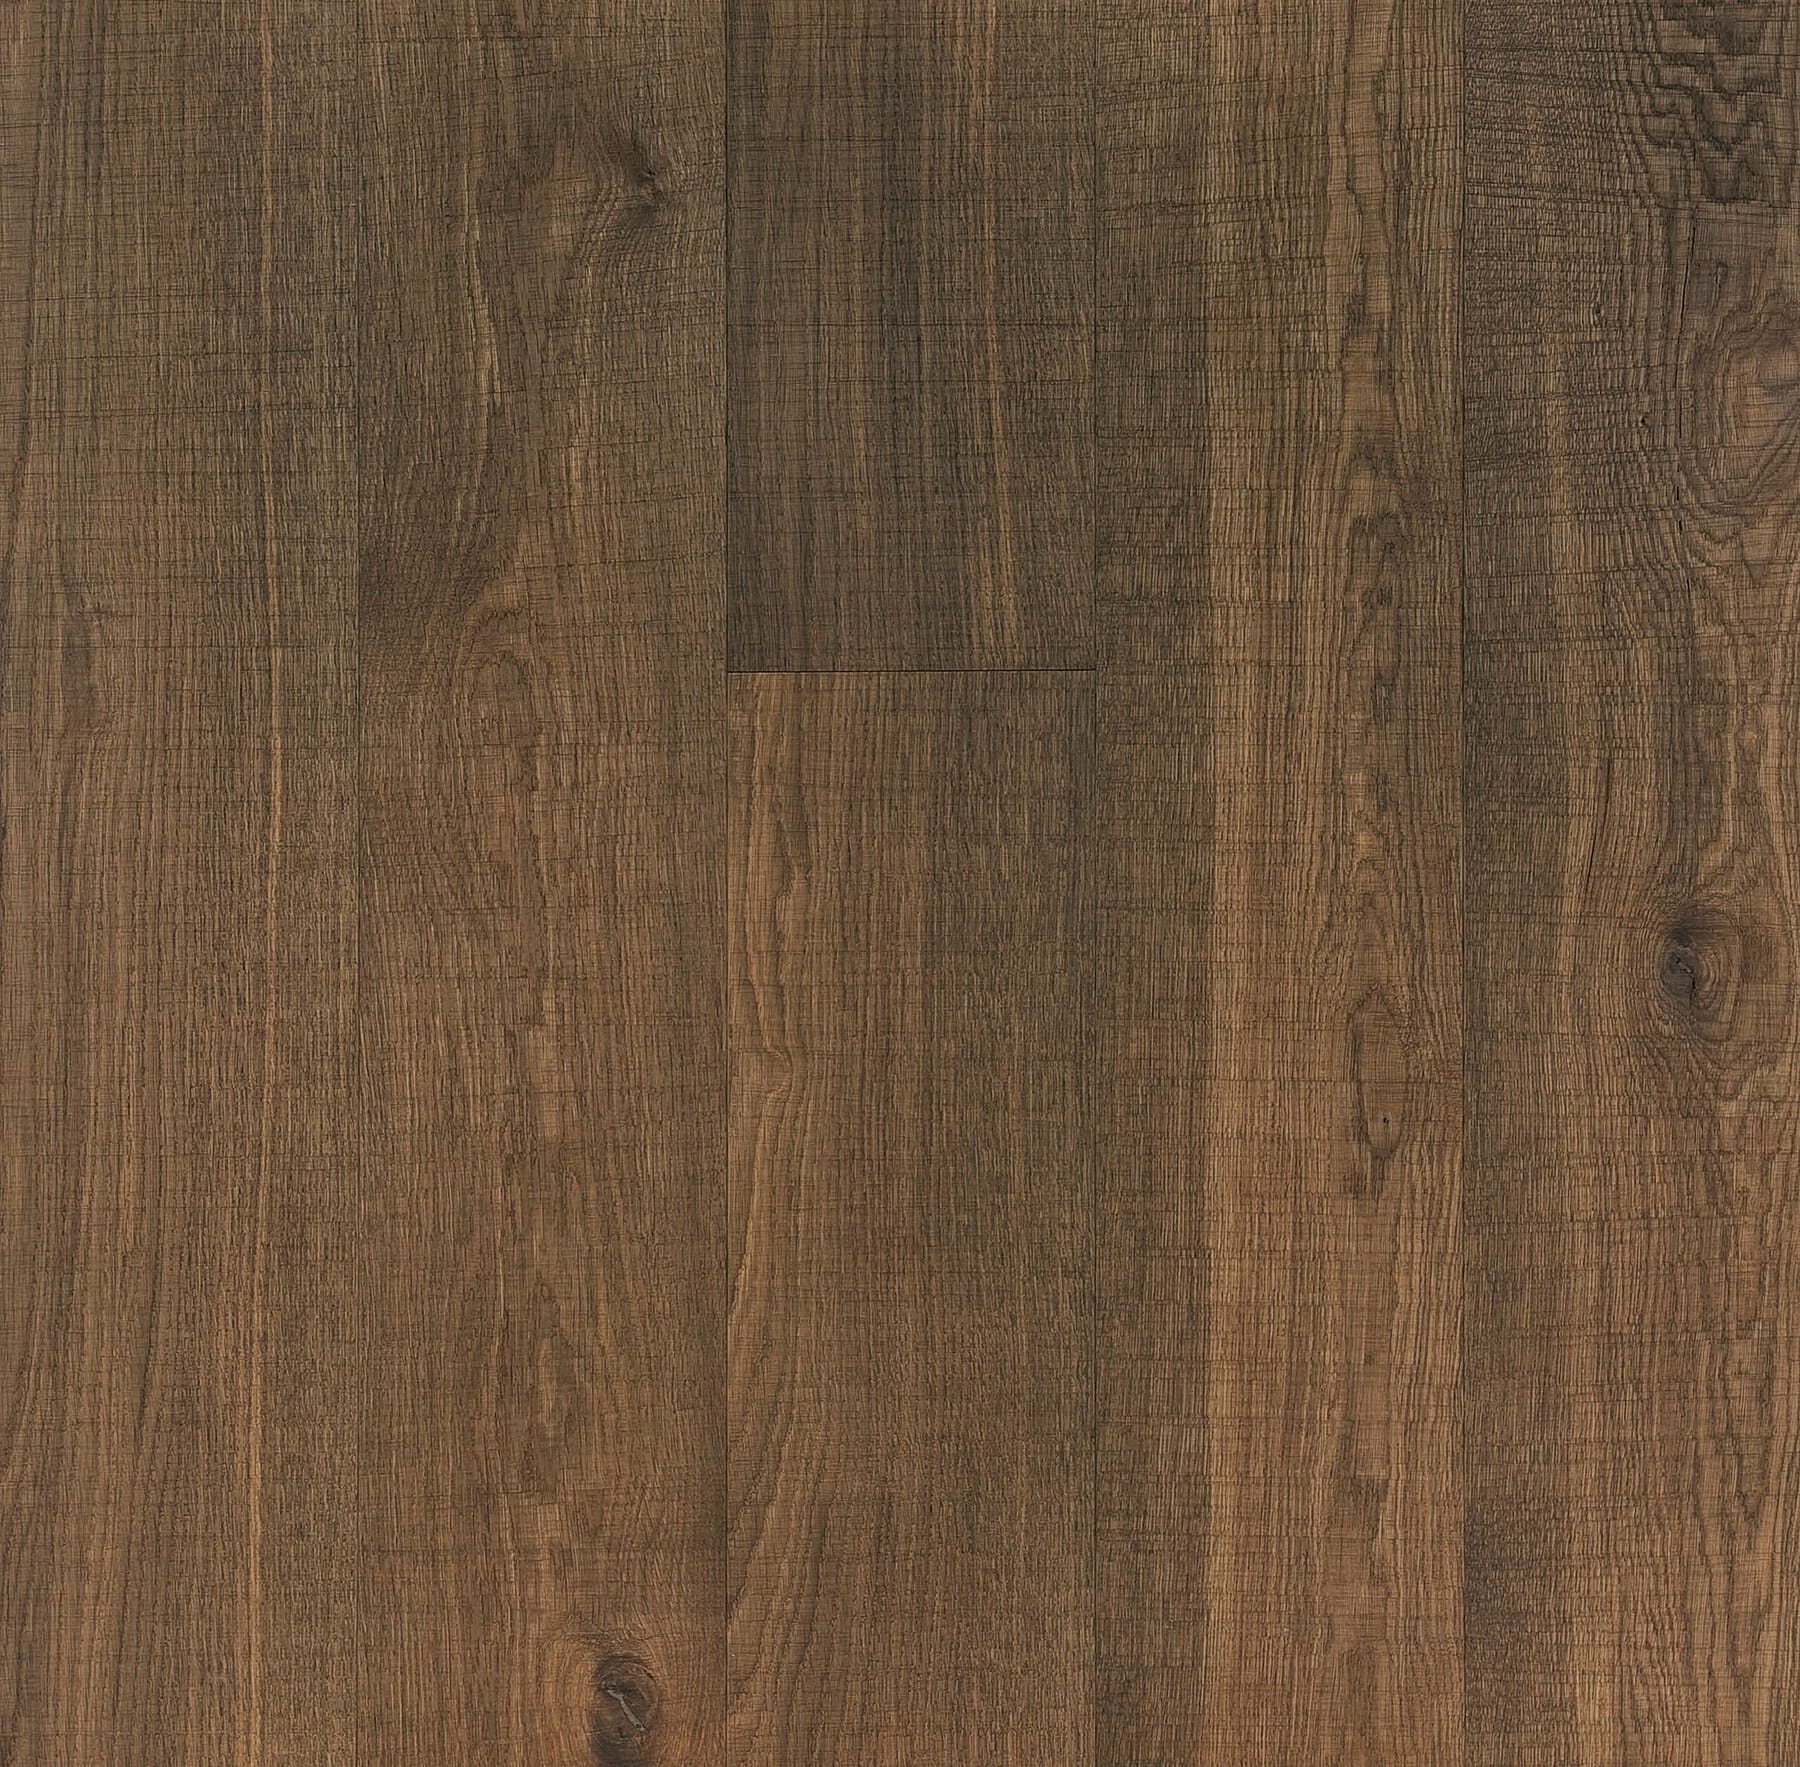 Dark brown engineered wood flooring oak classic grade 180mm wide band sawn finished with natural oil in Surrey